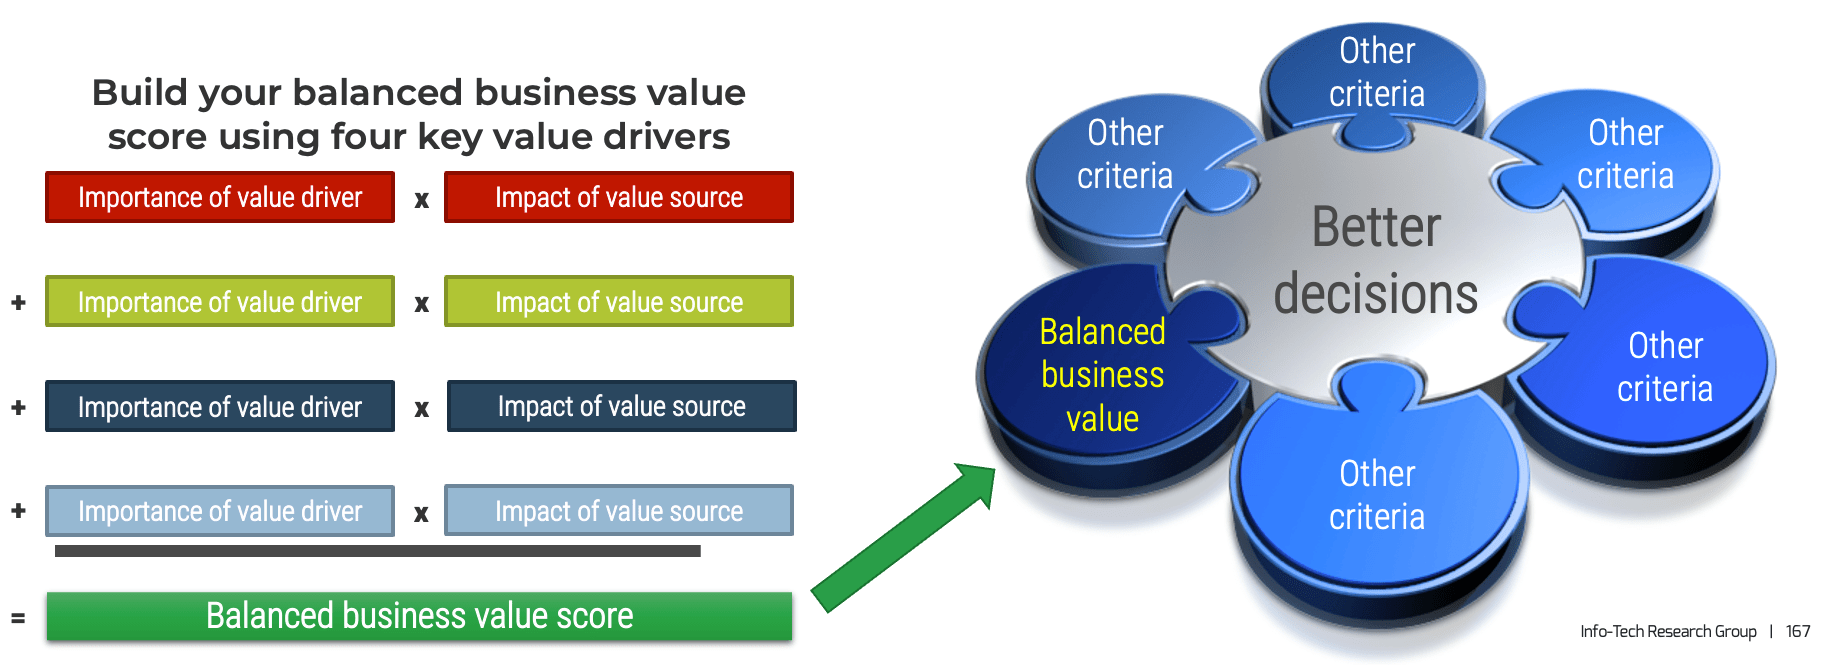 Build your balanced business value score by using four key value drivers.